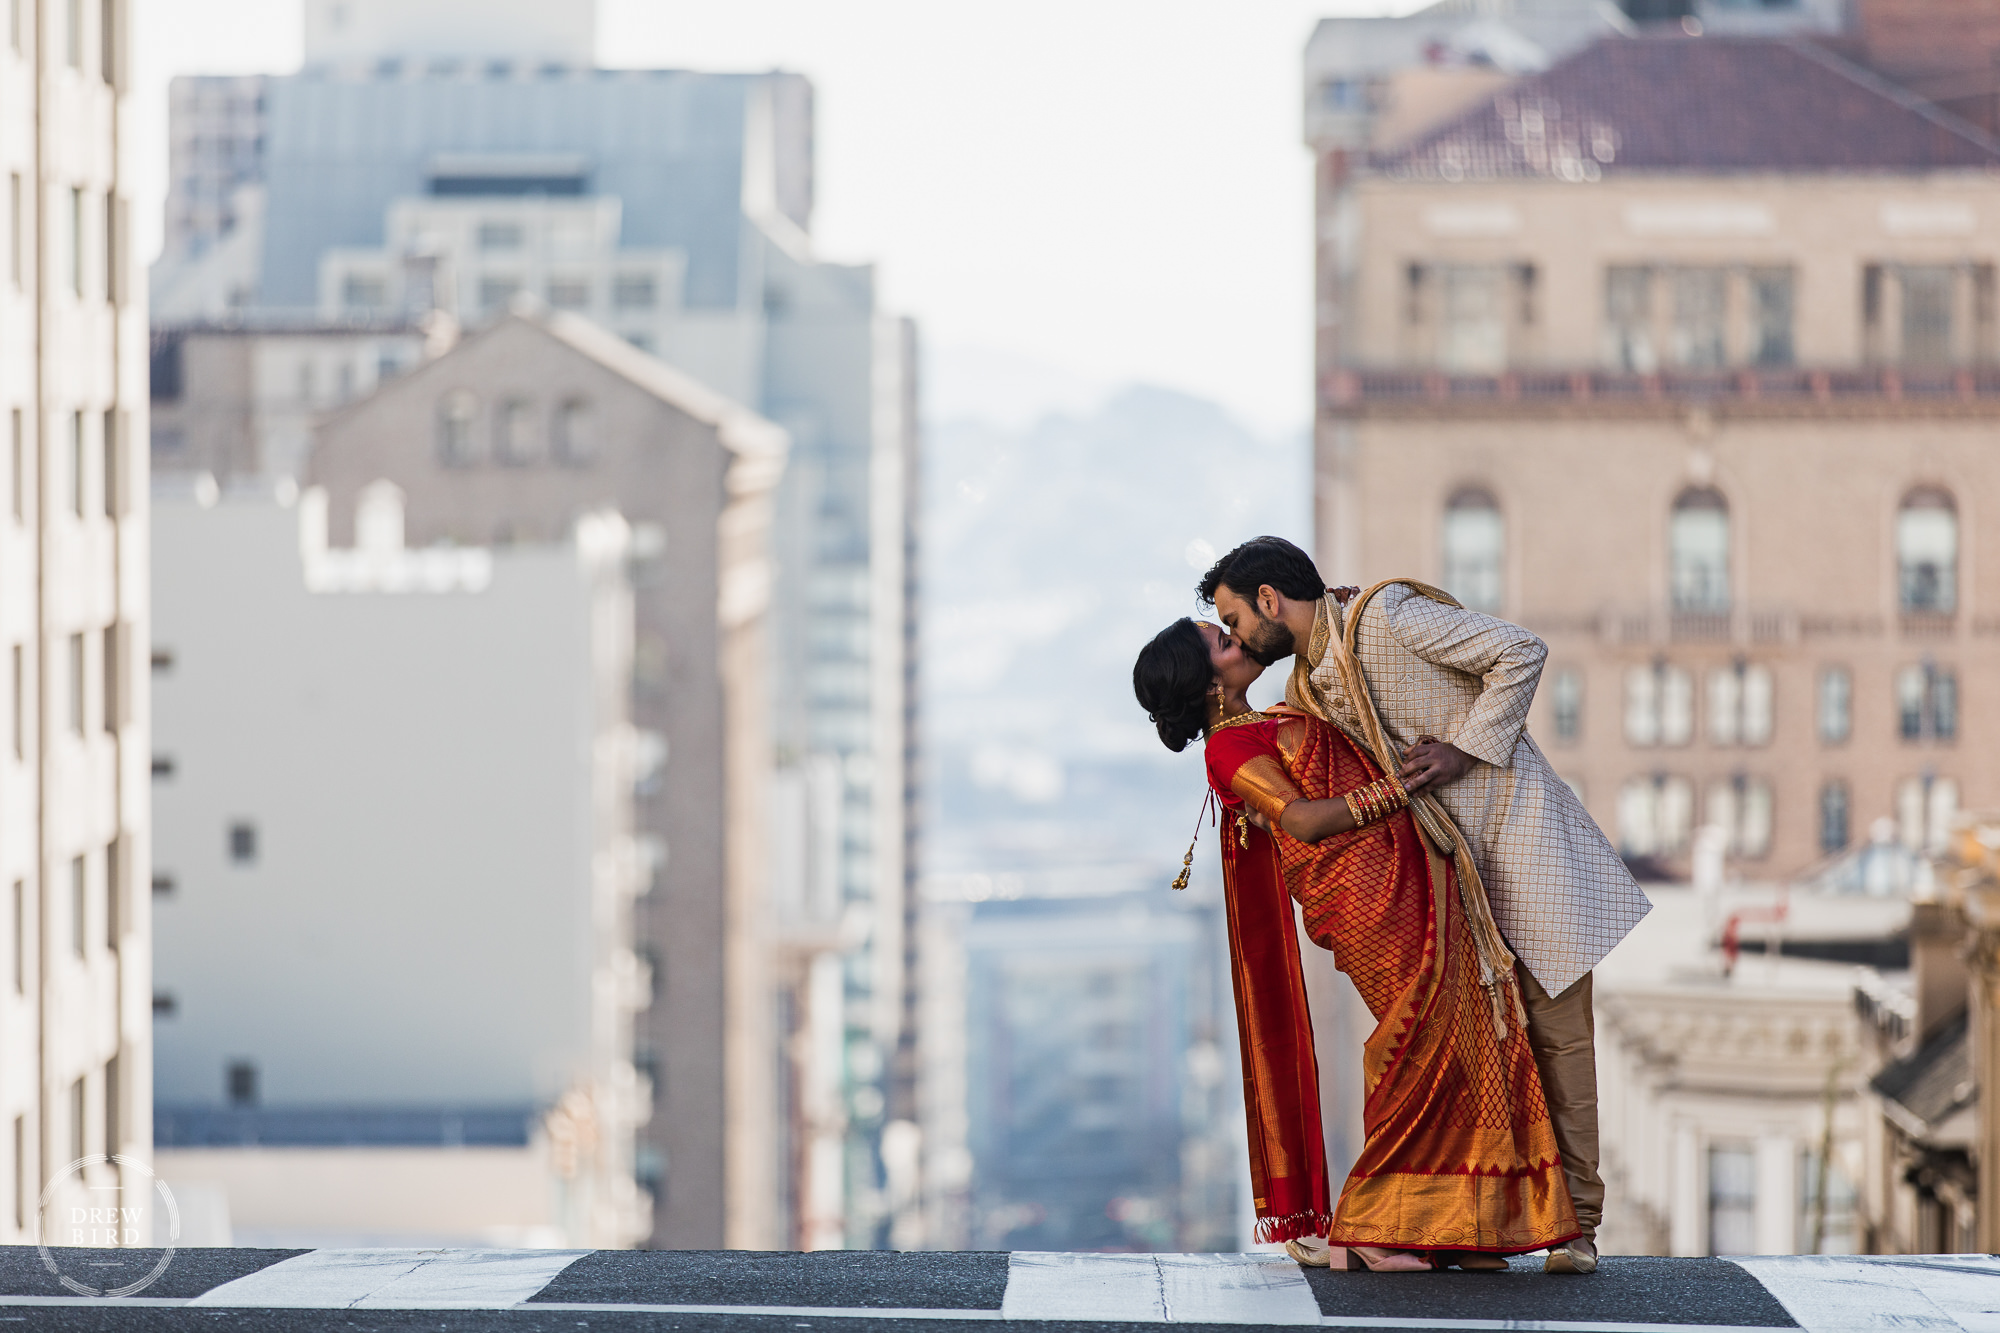 Fairmont Hotel wedding in San Francisco. Indian (Hindu) wedding couple kissing in the middle of the street.